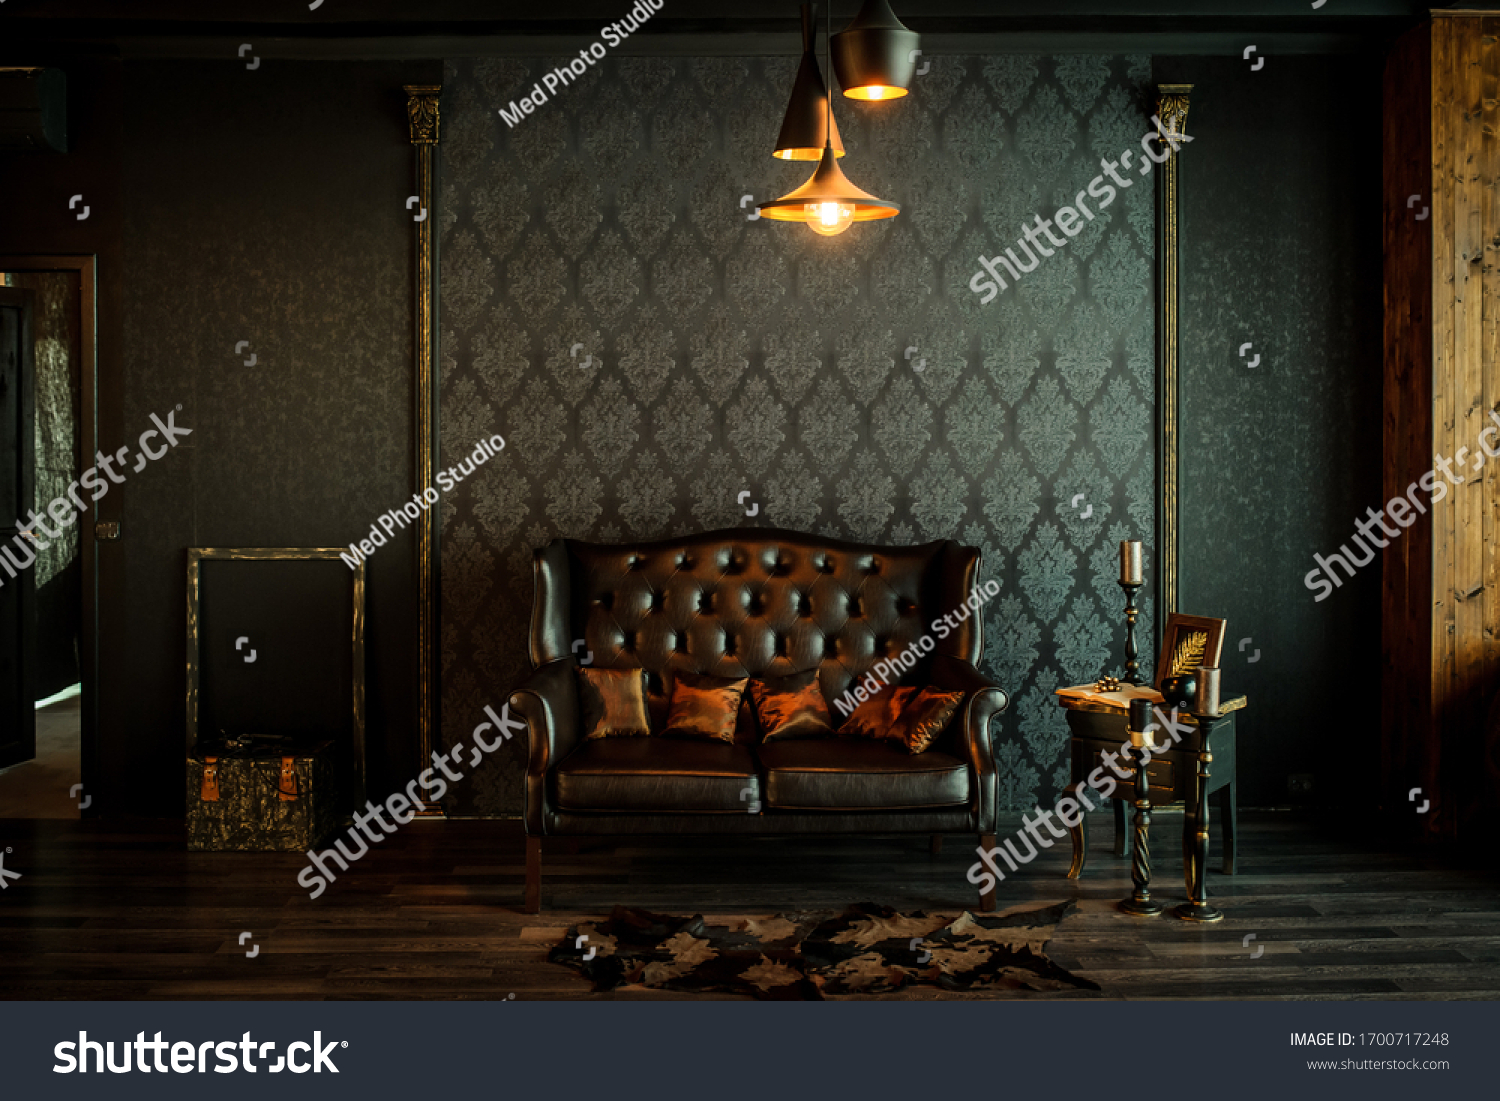 Old vintage interior with leather sofa, wood table and ceiling light. #1700717248